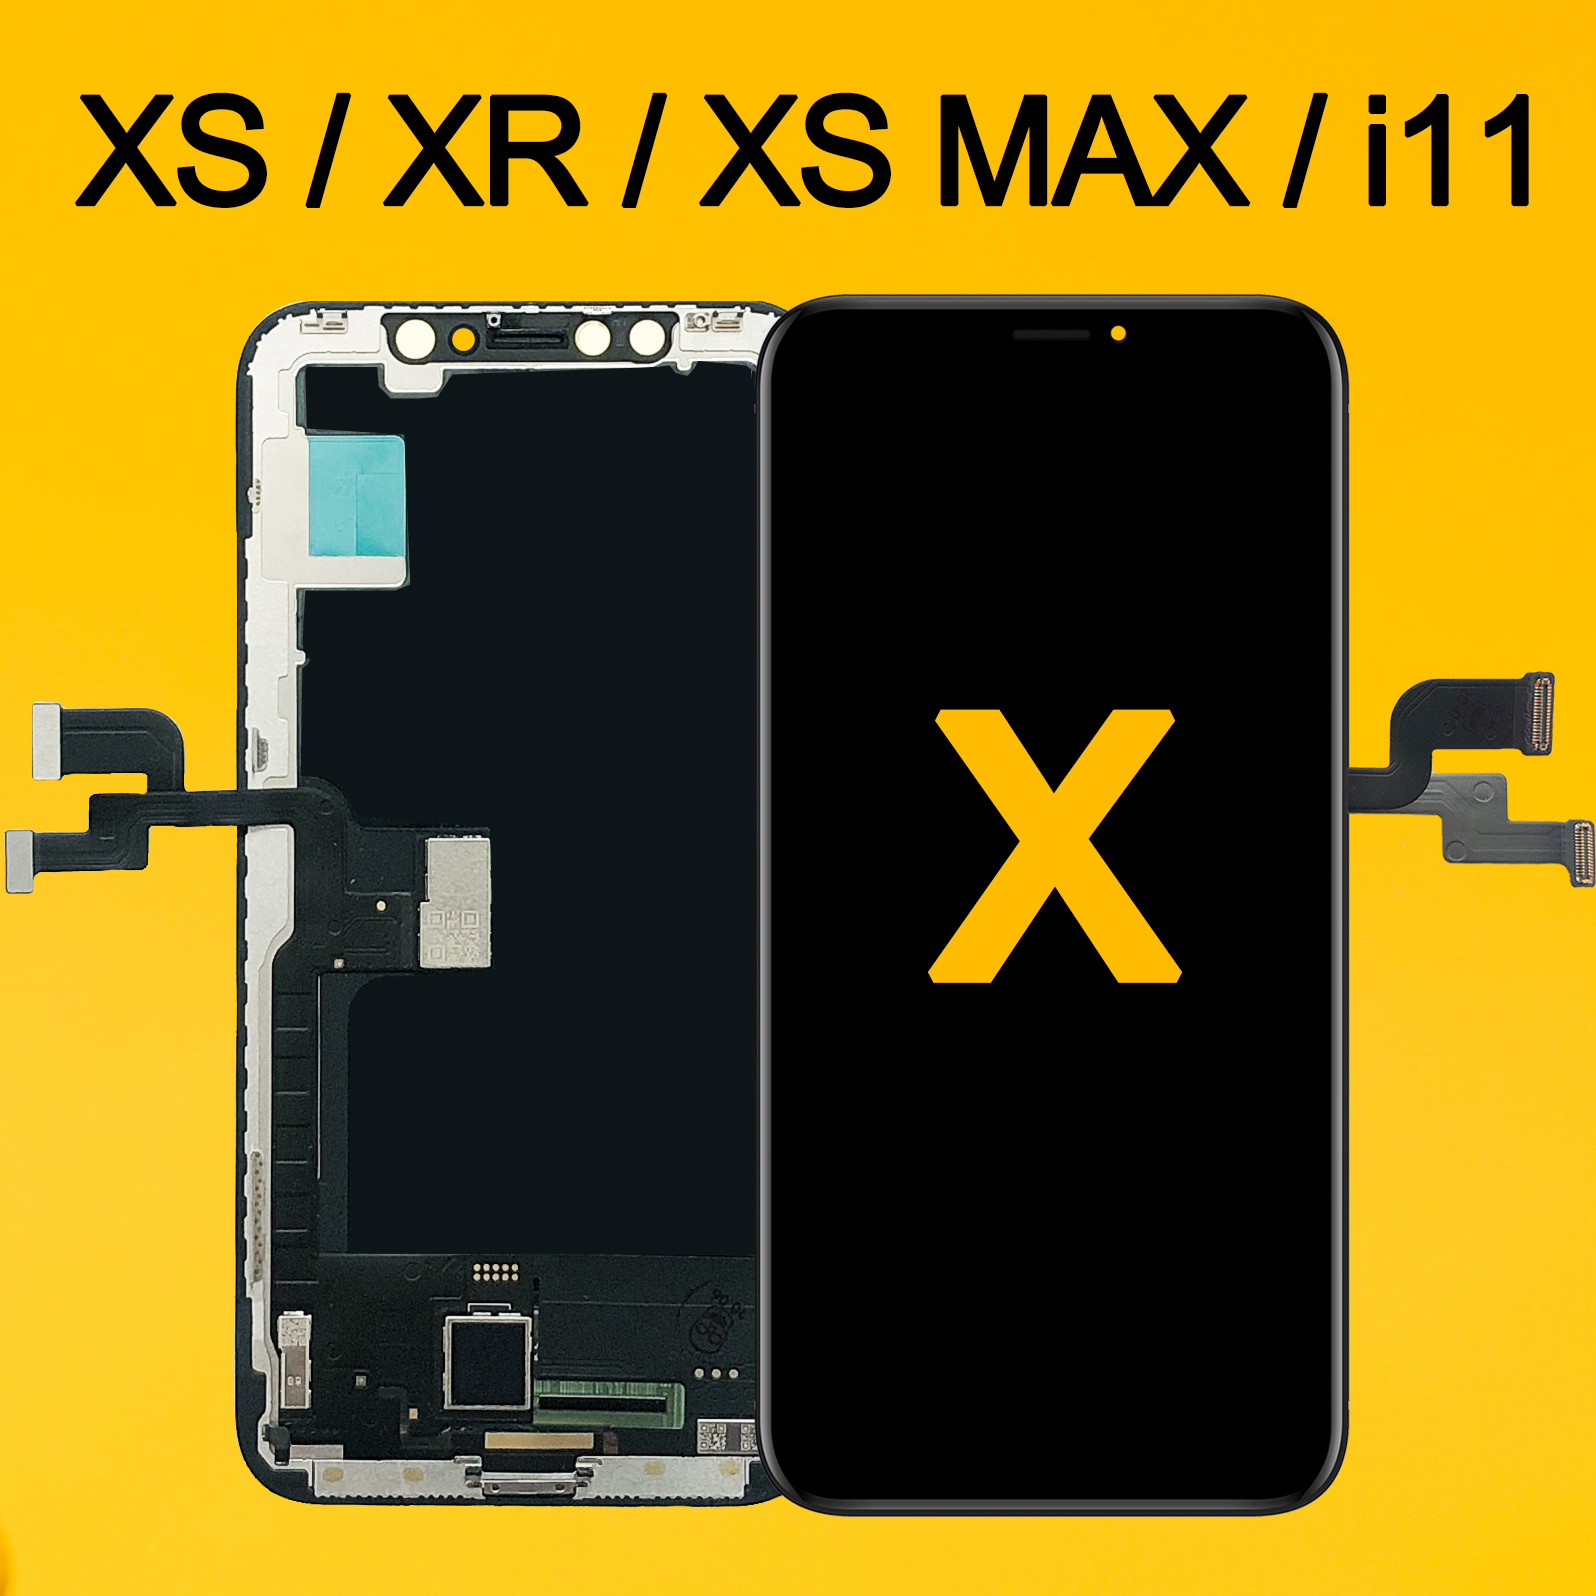 Ensemble écran tactile LCD OLED de remplacement, AAA, OEM, pour iPhone X XS Poly MAX Inell 11 n° 1